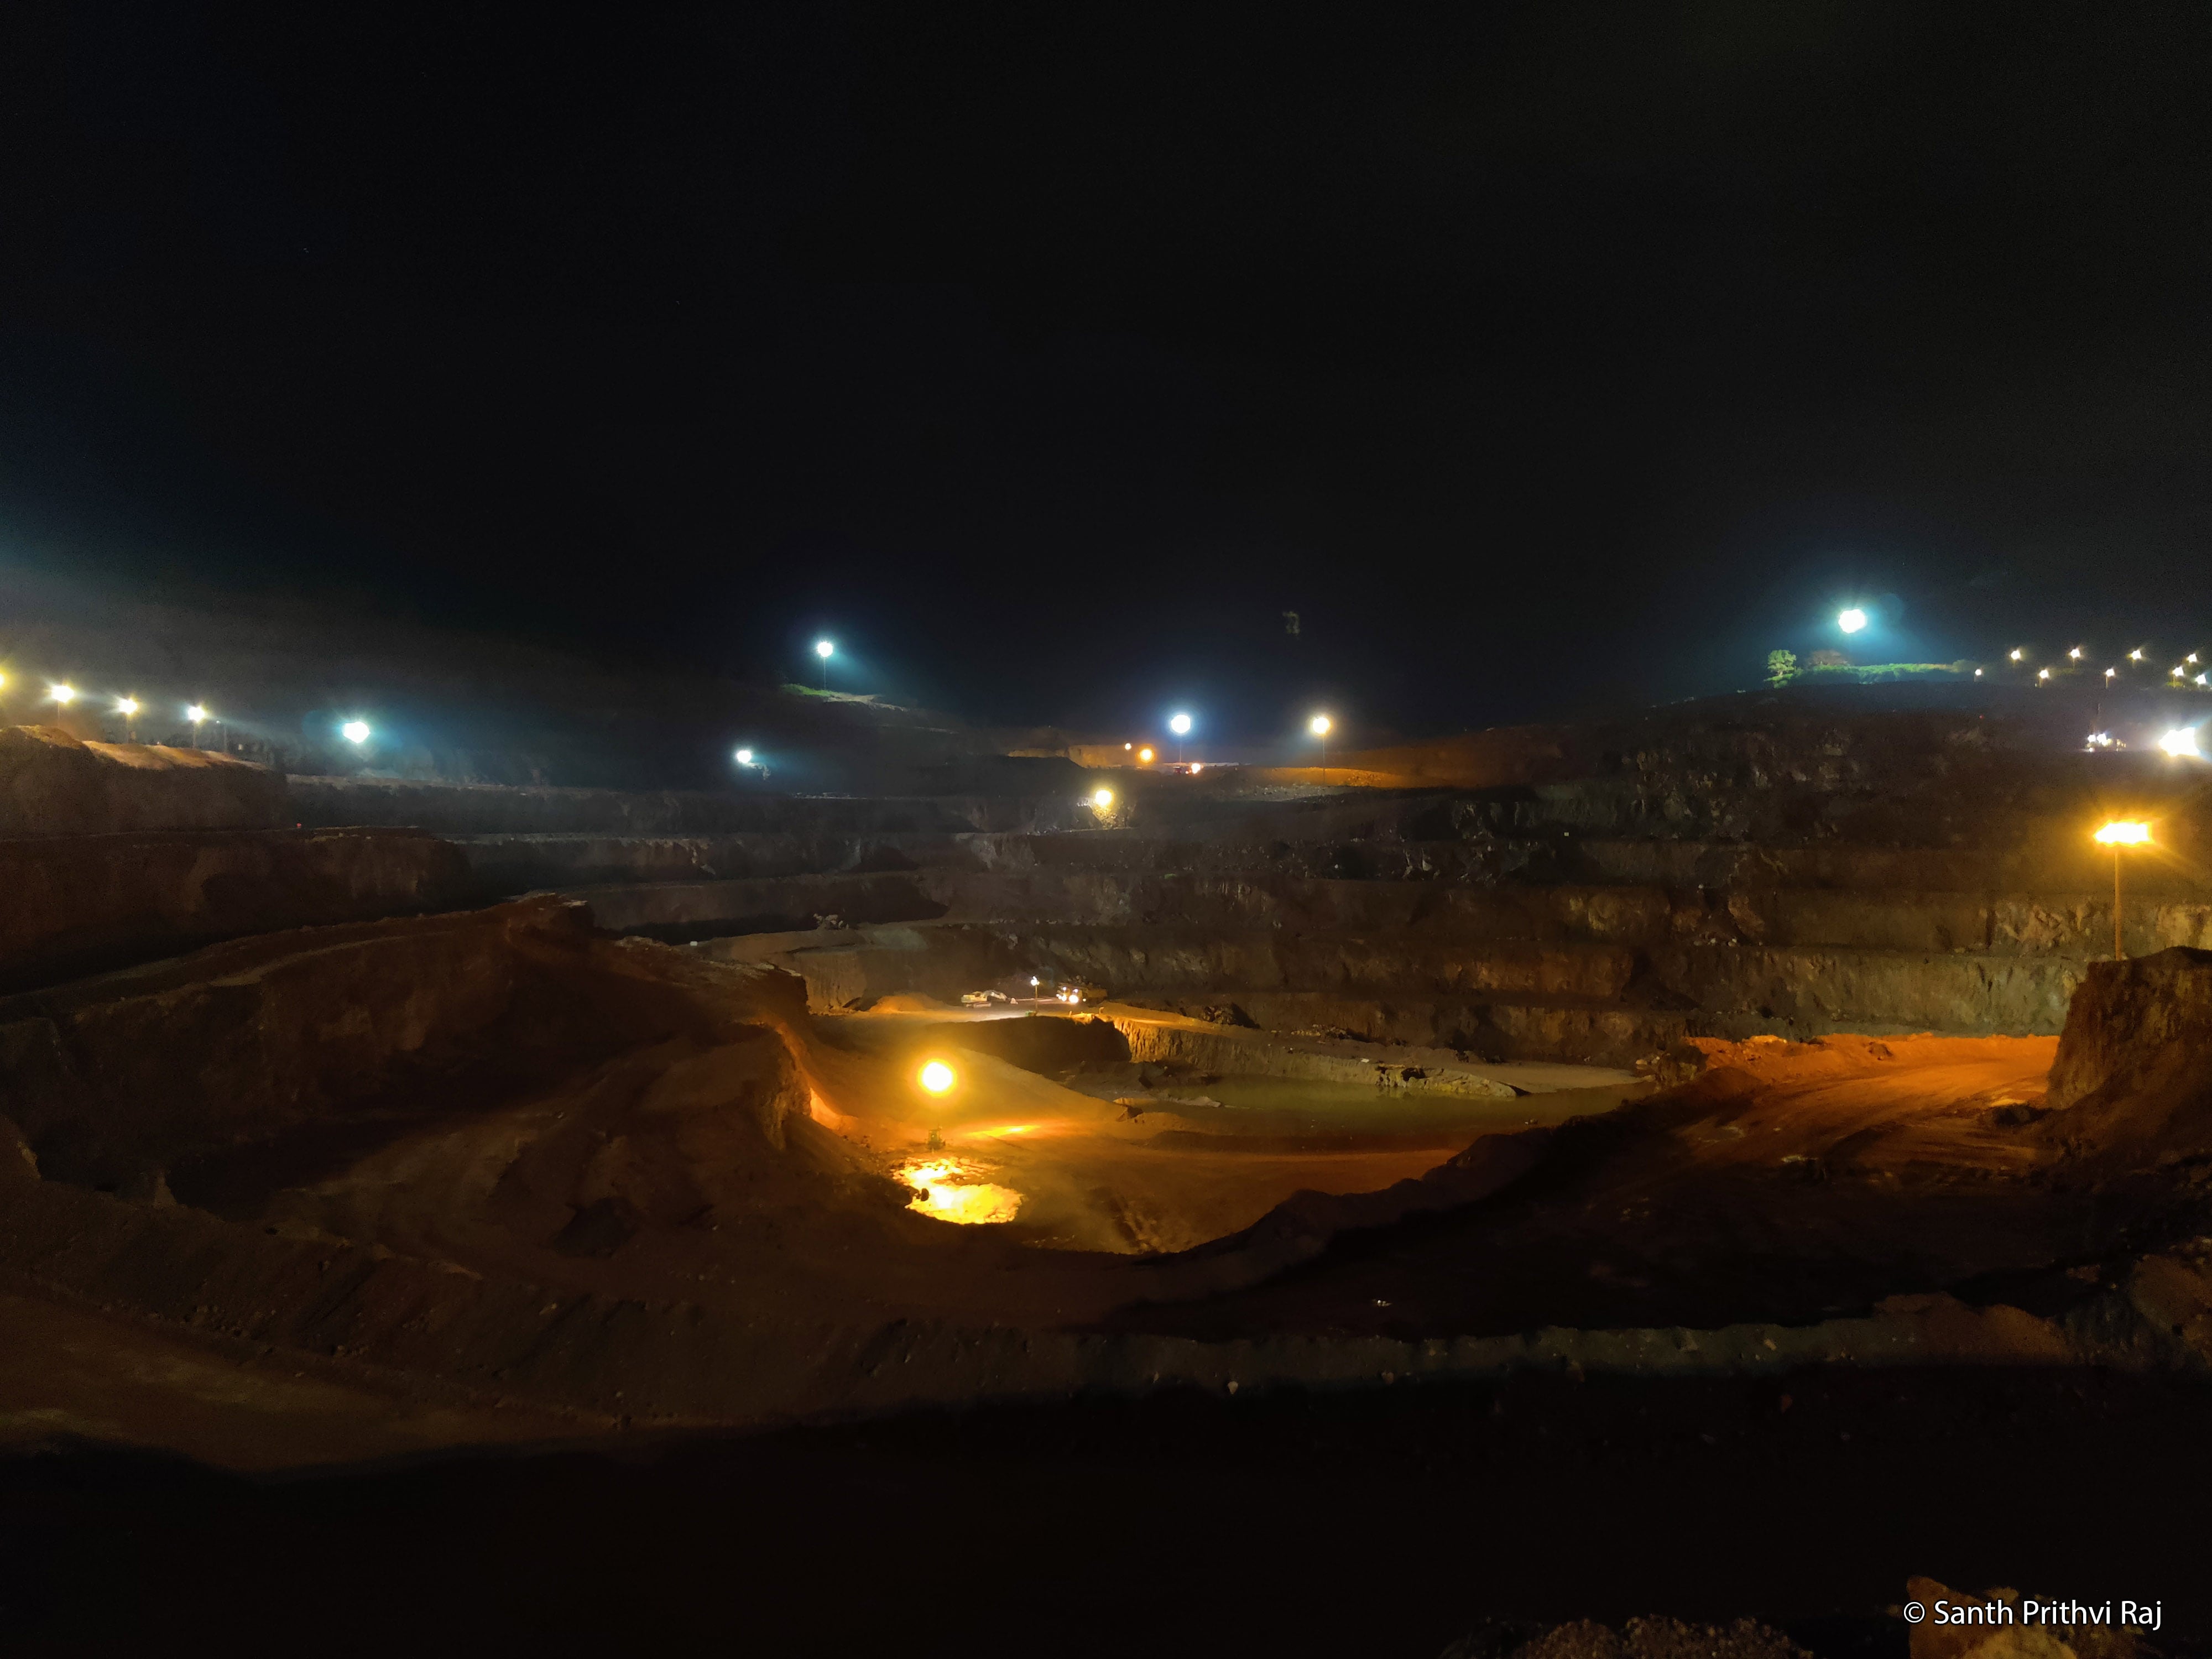 Honorable mention photo by Santh Prithvi Raj: Open pit mine at night